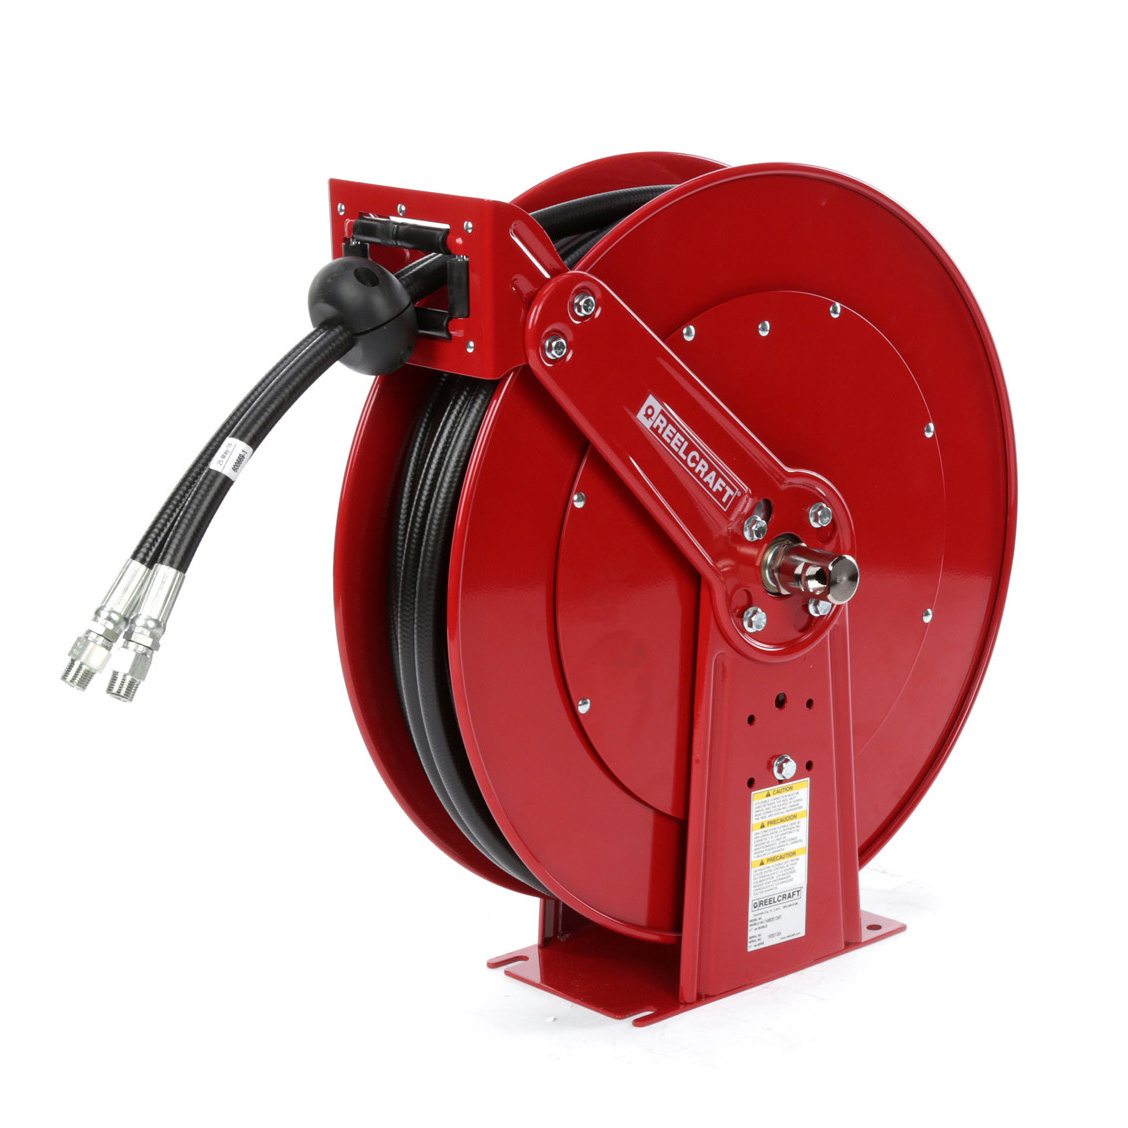 Th88050 Omp 0.5 In. X 50 Ft. Heavy Duty 2000 Psi Twin Hydraulic With Hose Reel, Red